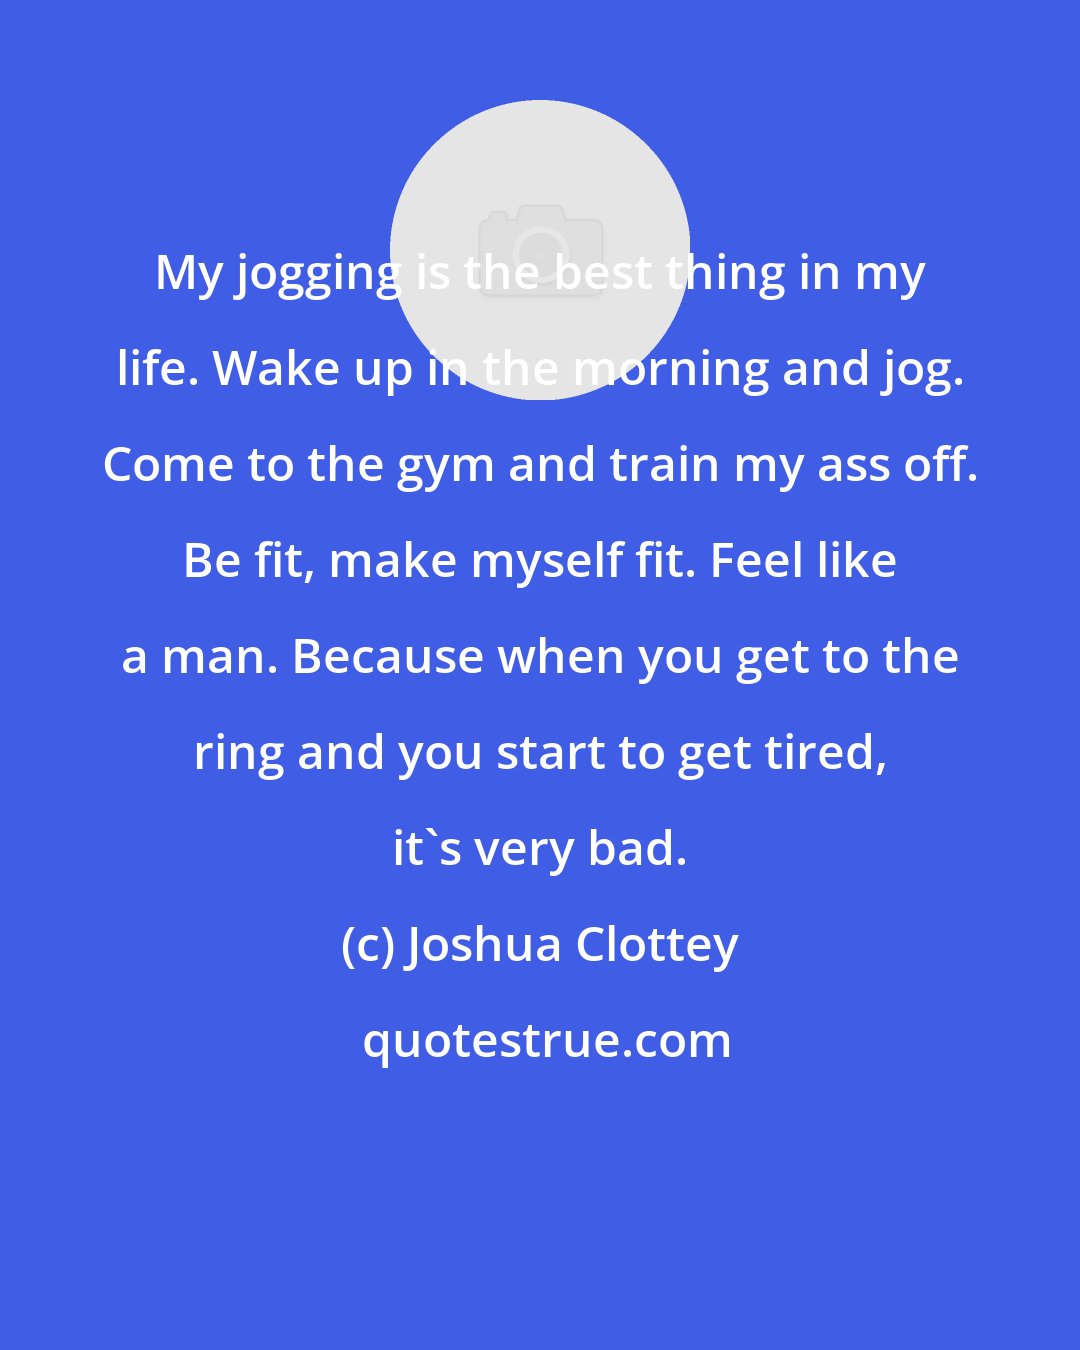 Joshua Clottey: My jogging is the best thing in my life. Wake up in the morning and jog. Come to the gym and train my ass off. Be fit, make myself fit. Feel like a man. Because when you get to the ring and you start to get tired, it's very bad.